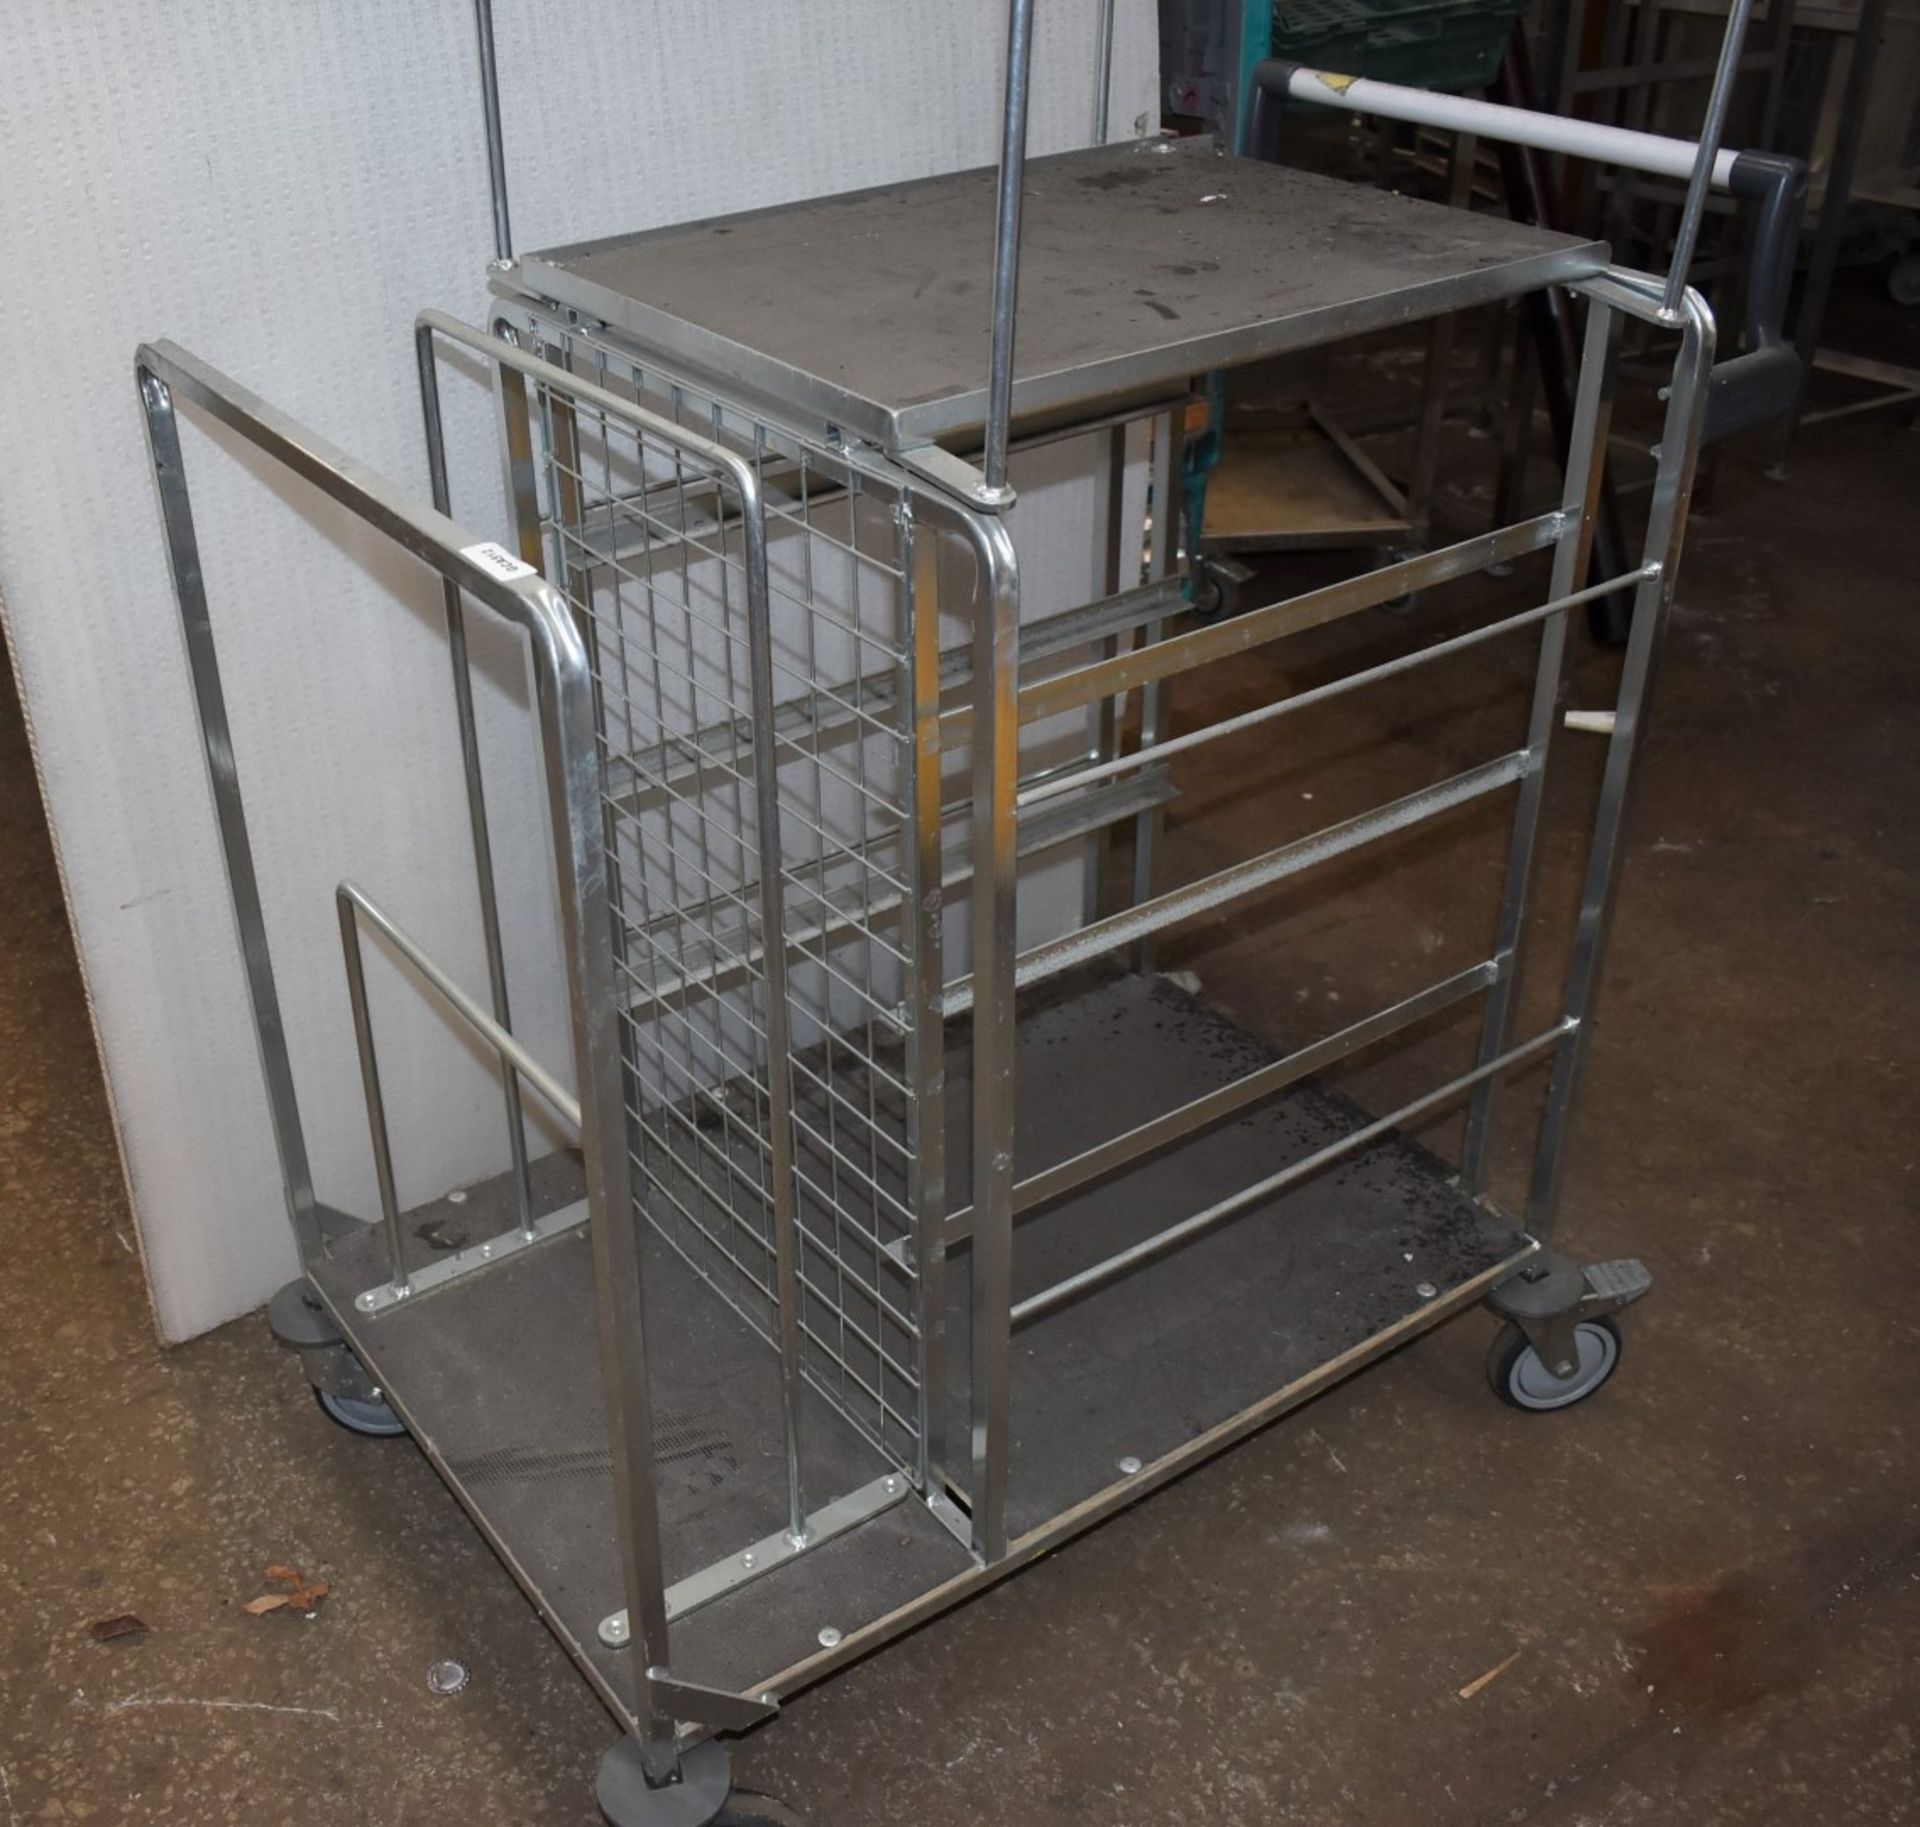 1 x Mobile Picker / Packer Trolly - Overall Size H105 x W100 x D60 cms - CL011 - Ref GCA WH5 - - Image 5 of 5